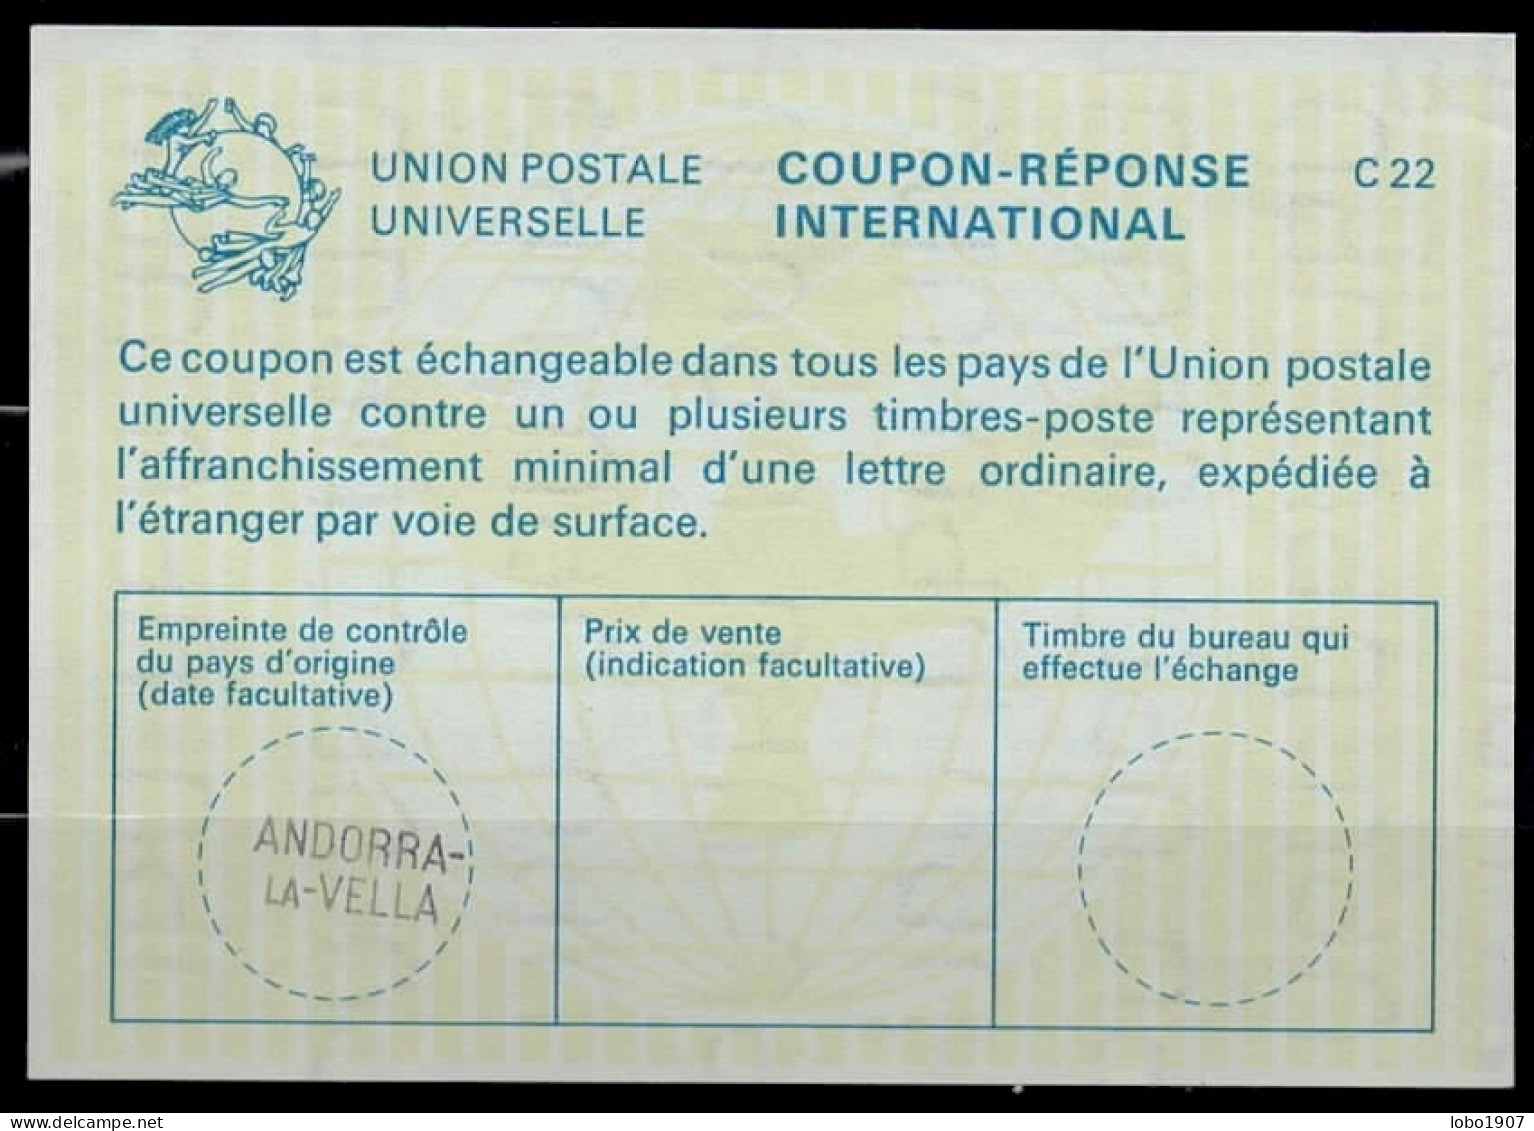 ANDORRE / ANDORRA La23  International Reply Coupon Reponse Antwortschein IAS IRC  O Small ANDORRE-LA-VELLA  ( Horizontal - Stamped Stationery & Prêts-à-poster